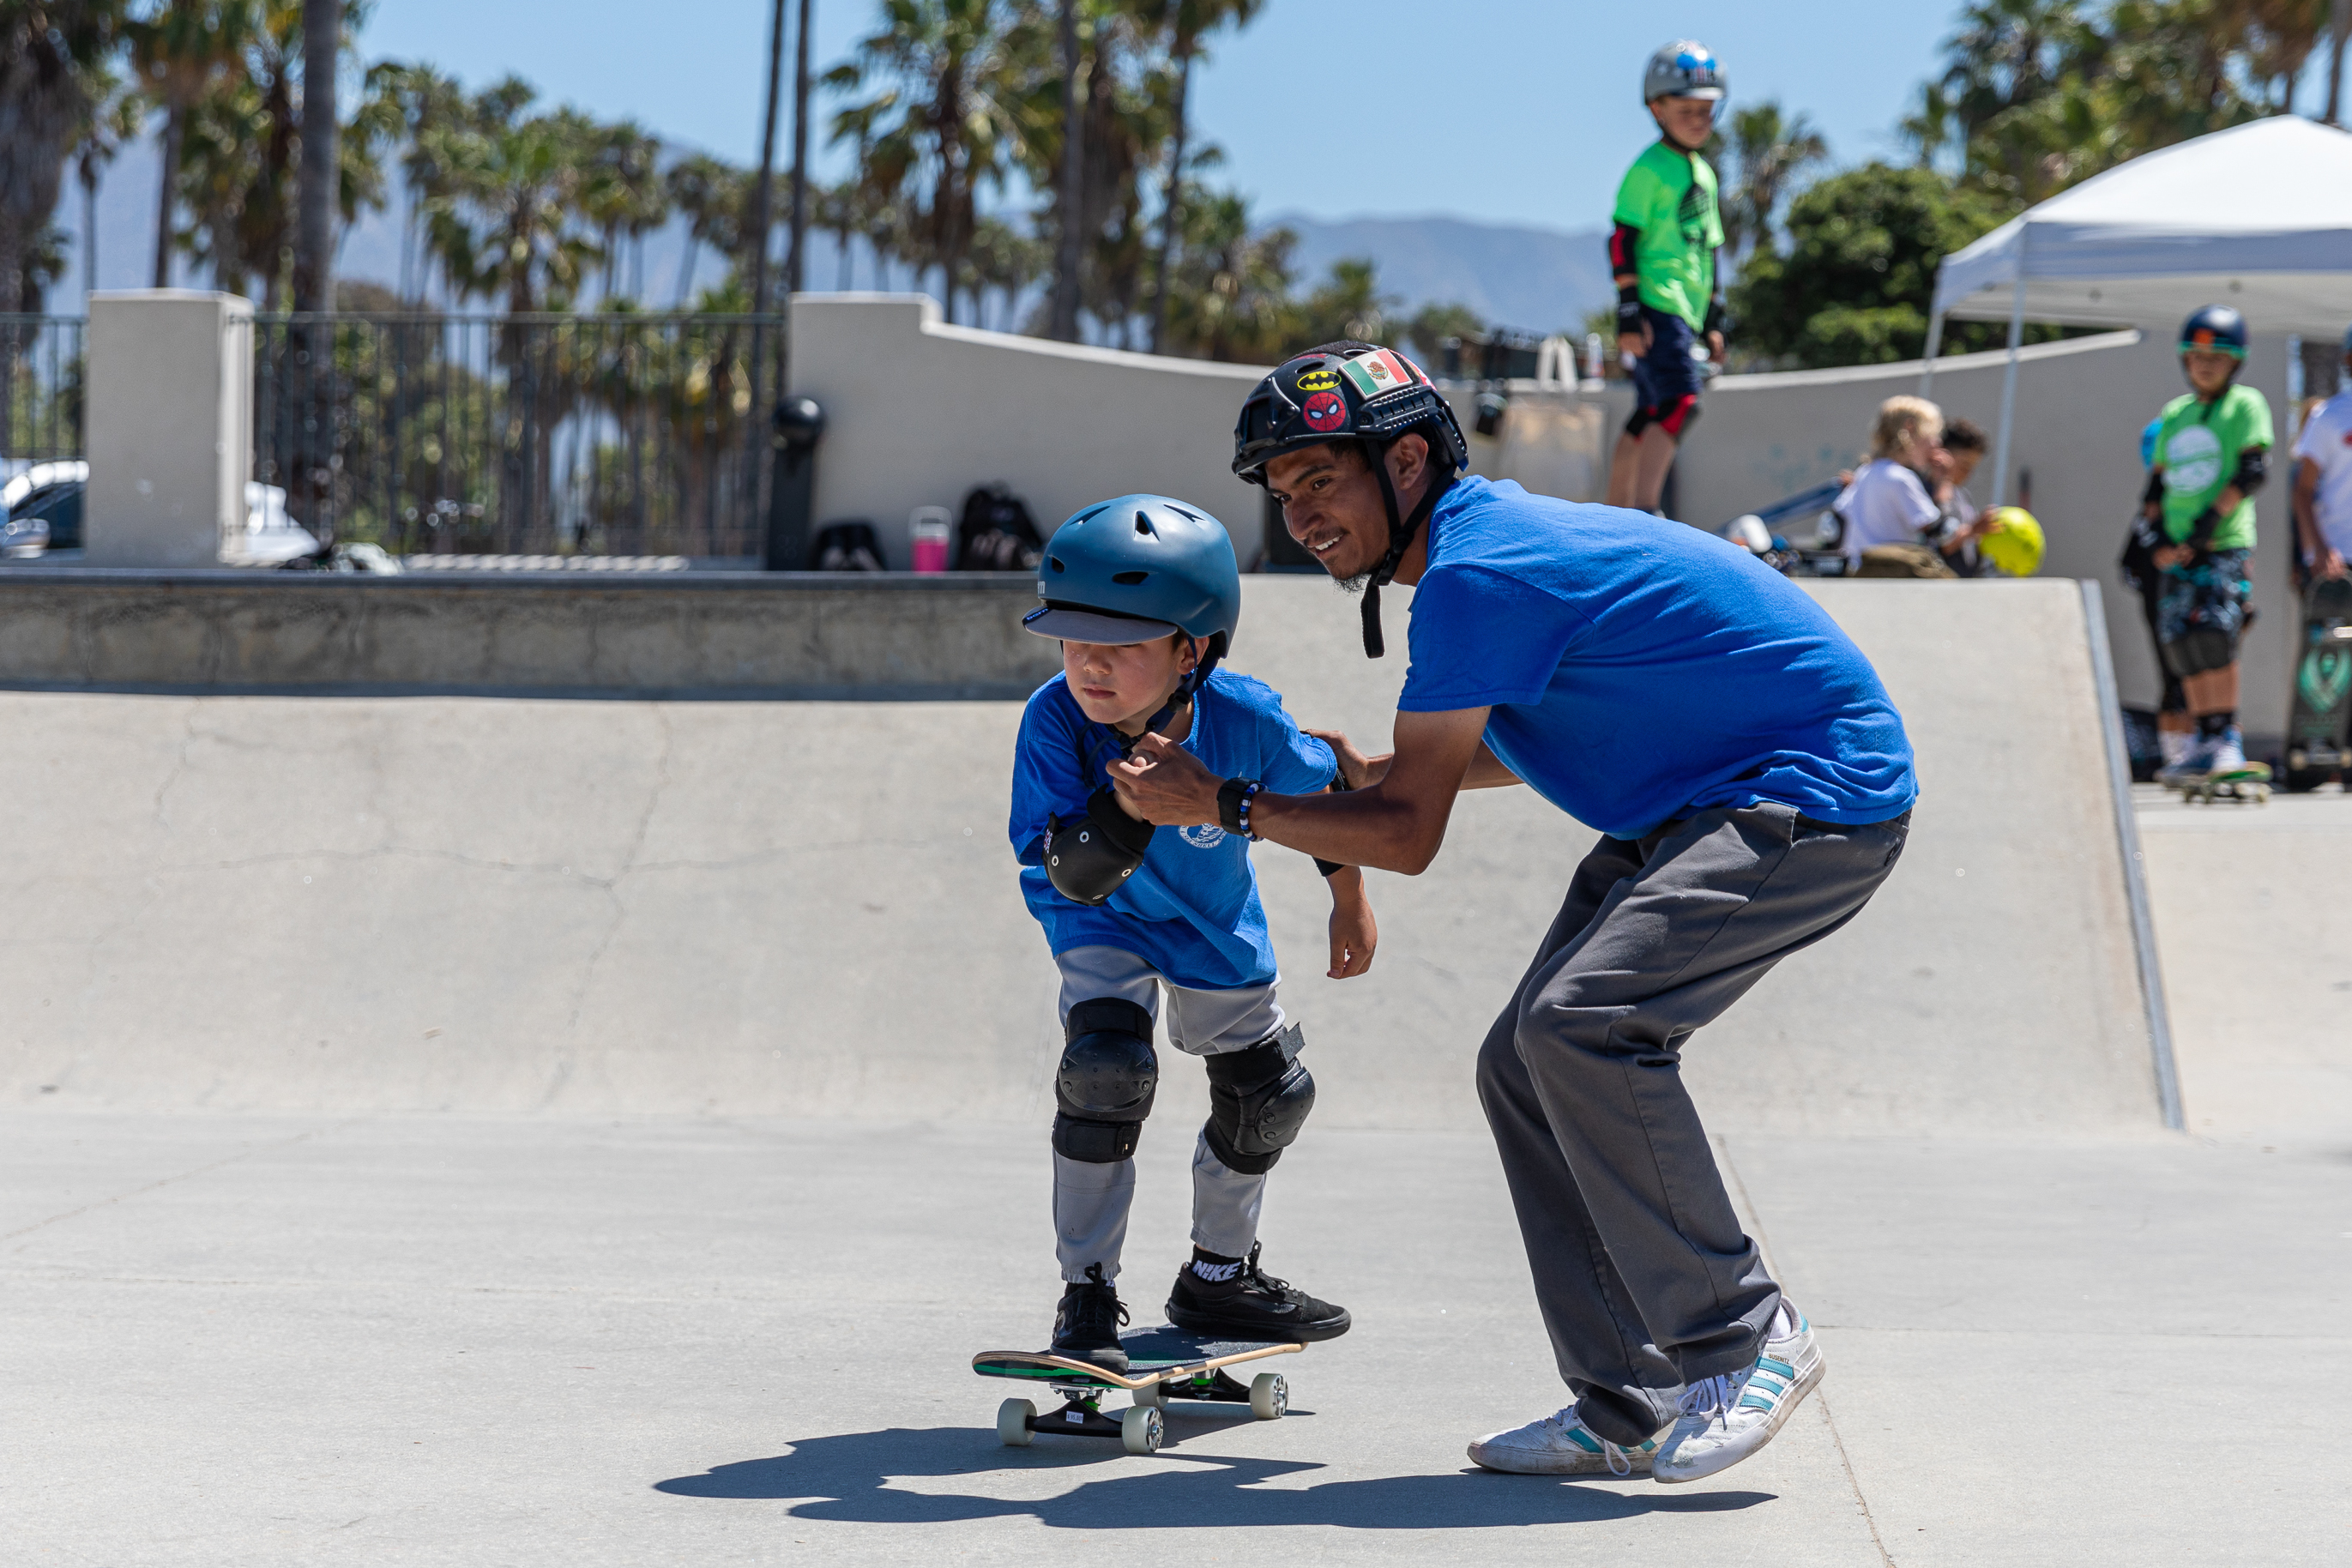 Camper riding a skateboard is helped by a counselor holding their hands